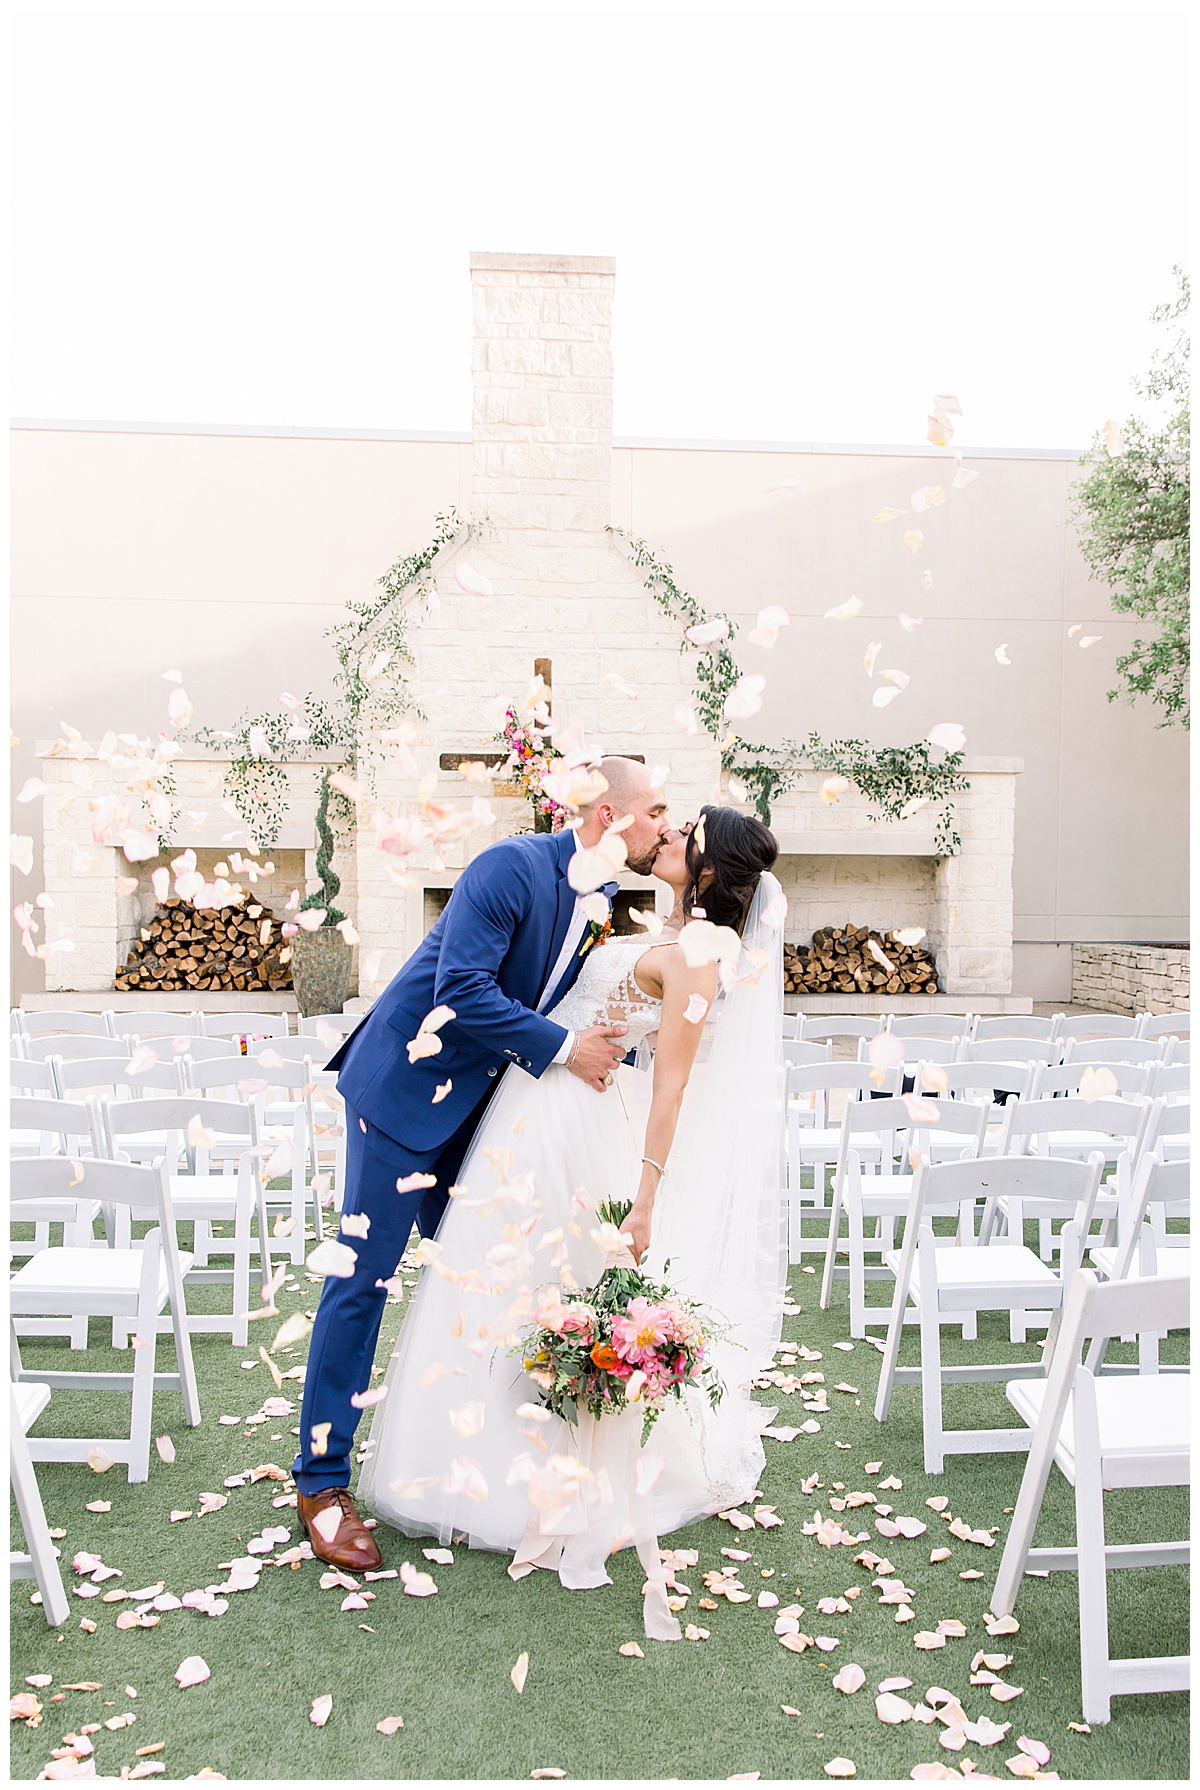 Bride and groom leaned over kissing while showered in rose petals in front of alter at Hyatt Regency Hill Country Resort Wedding in San Antonio, TX | San Antonio Wedding photographer| Destination Wedding Photographer| Monica Roberts Photography | monicaroberts.com